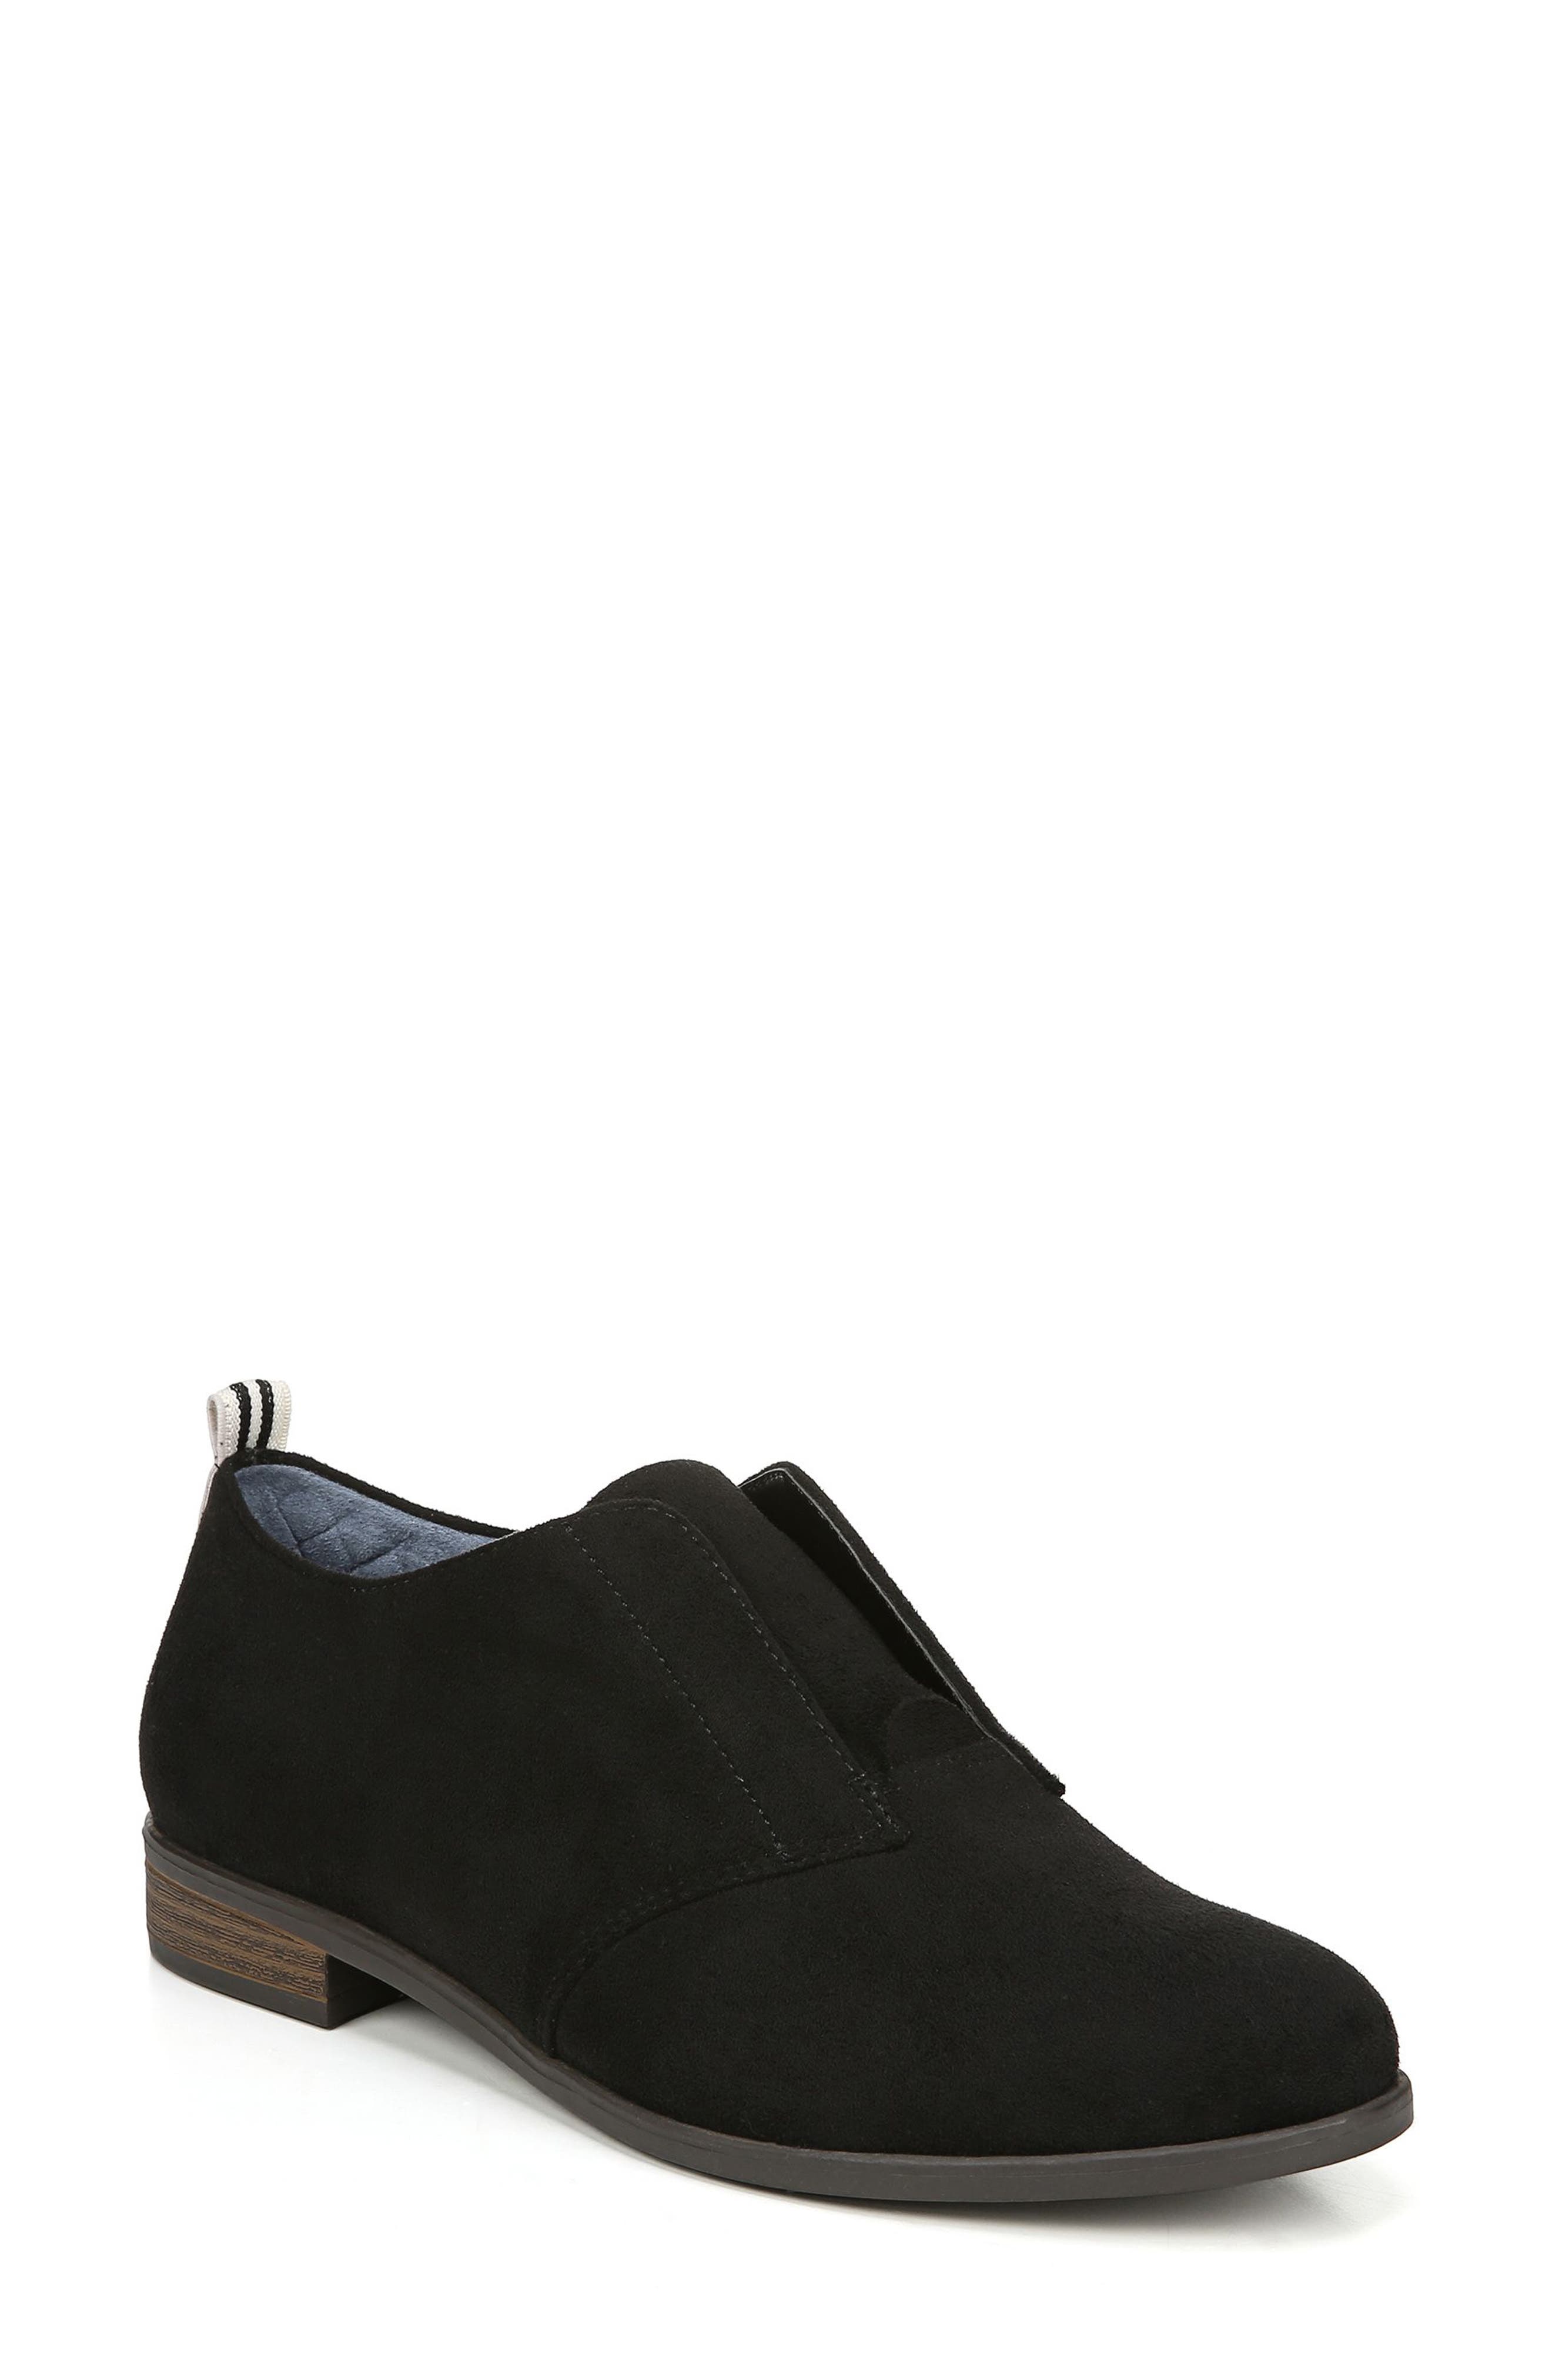 UPC 736705464167 product image for Women's Dr. Scholl's Rialta Slip-On Oxford, Size 8.5 M - Black | upcitemdb.com